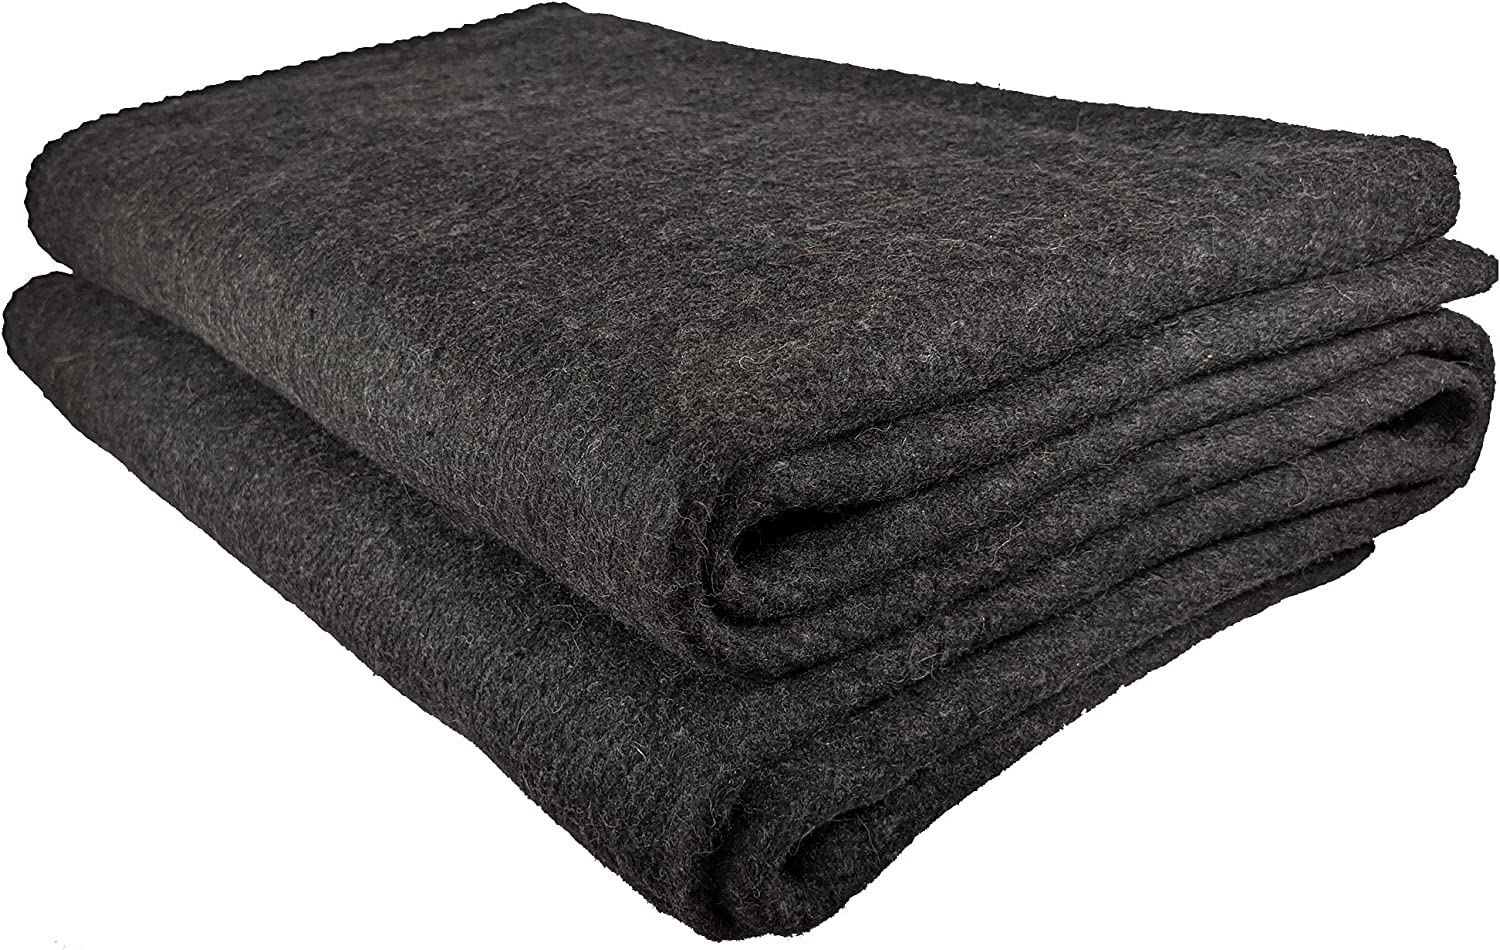 EPG Extra Large Wool Blanket | Warm, Comfortable, Stylish, Military Style | XL Queen / King – 72 x 92 in, 80% Wool, 5.35 lbs | Camping, Outdoor, Bedding, Emergency, Survival, Cabin, RV (Dark Gray)